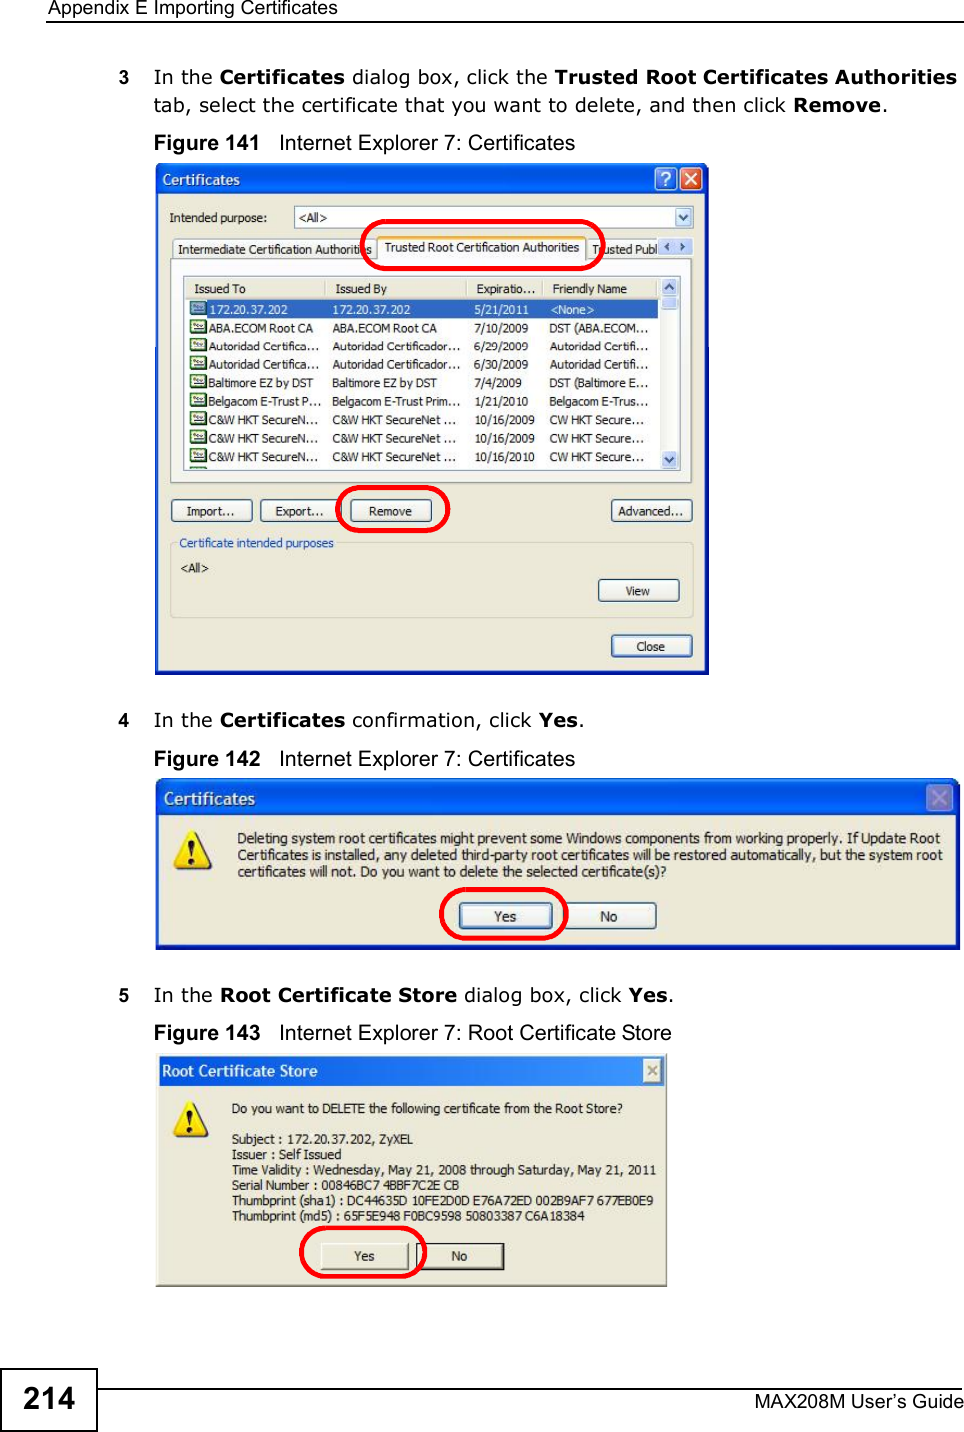 Appendix EImporting CertificatesMAX208M User s Guide2143In the Certificates dialog box, click the Trusted Root Certificates Authorities tab, select the certificate that you want to delete, and then click Remove.Figure 141   Internet Explorer 7: Certificates4In the Certificates confirmation, click Yes.Figure 142   Internet Explorer 7: Certificates5In the Root Certificate Store dialog box, click Yes.Figure 143   Internet Explorer 7: Root Certificate Store